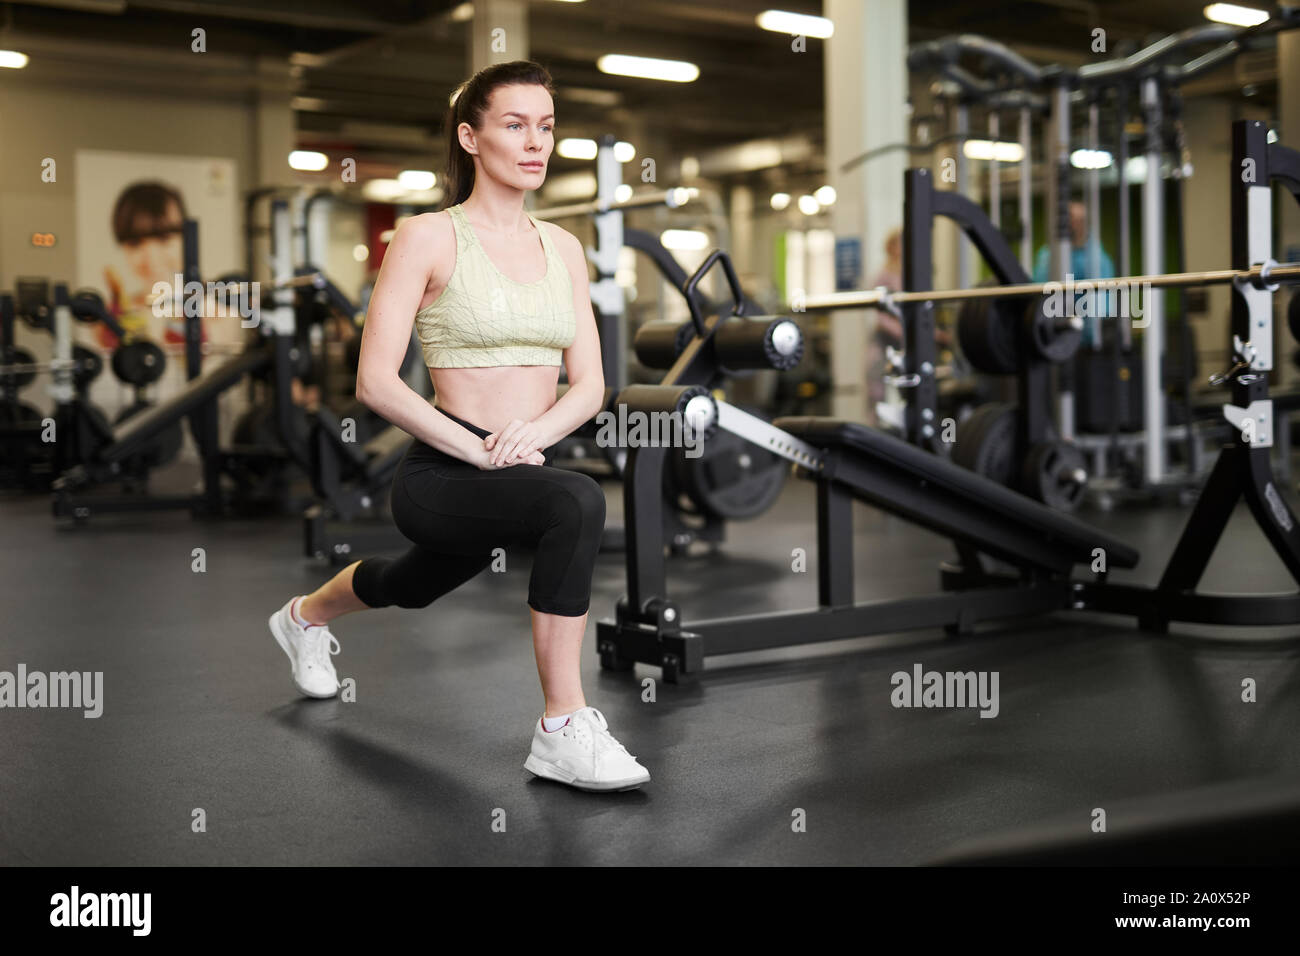 Full length portrait of fit young woman stretching legs during workout in modern gym, copy space Stock Photo